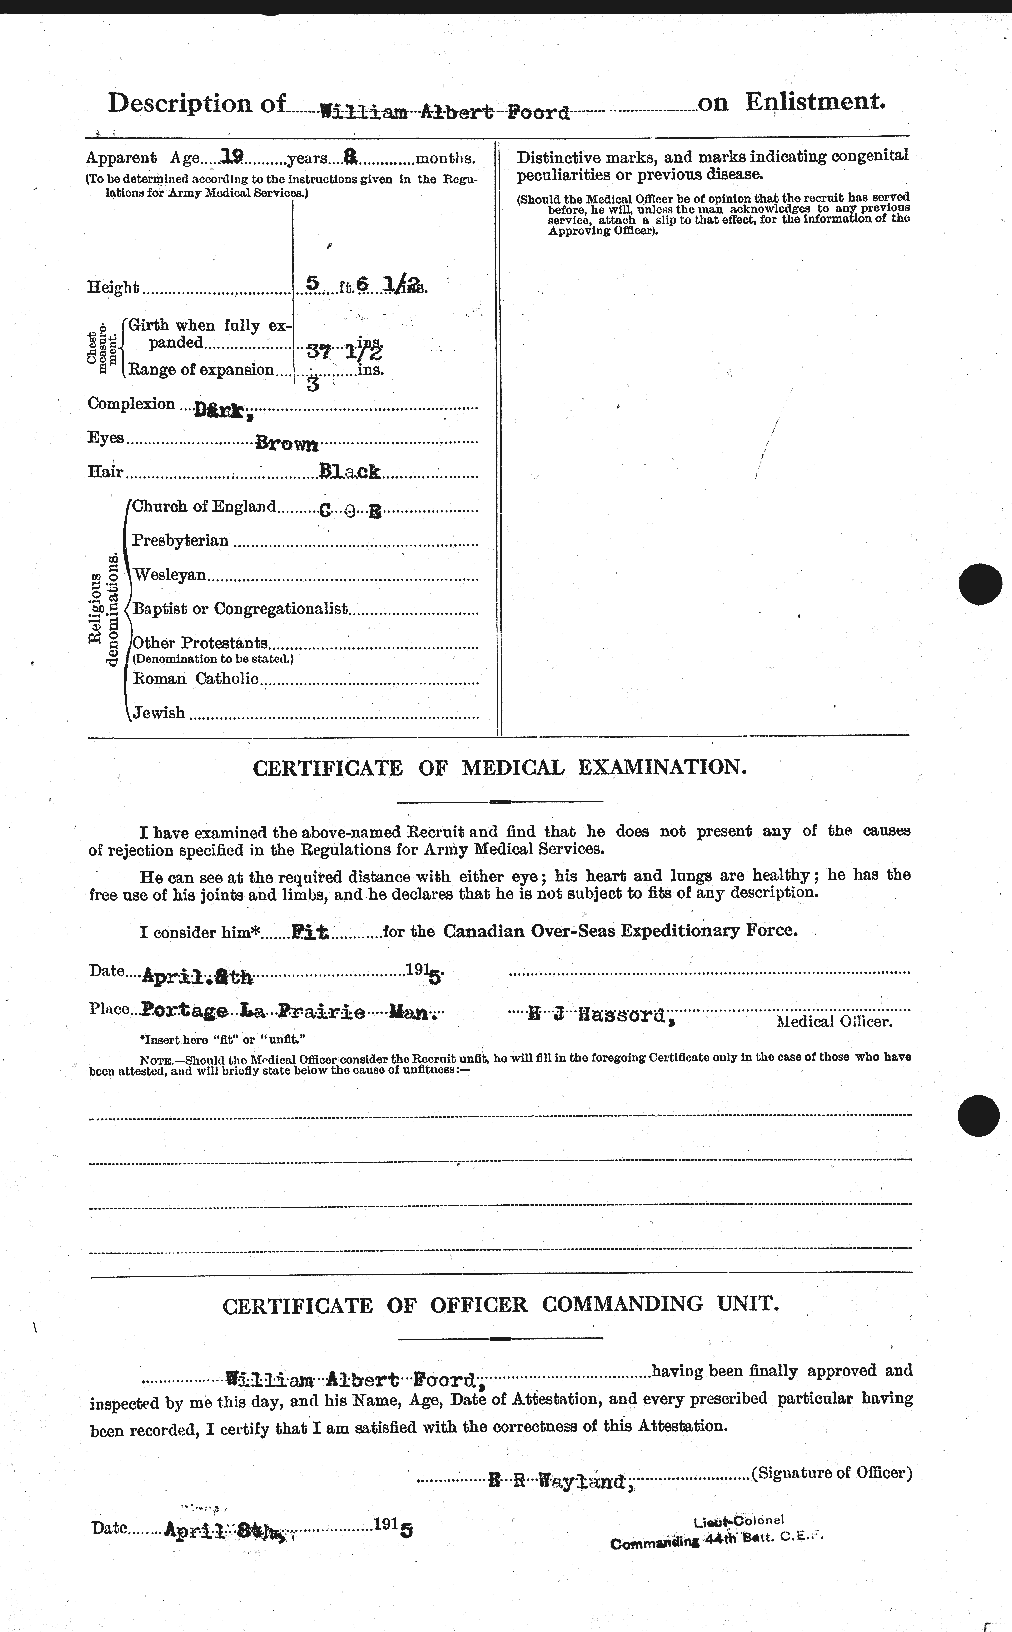 Personnel Records of the First World War - CEF 328925b